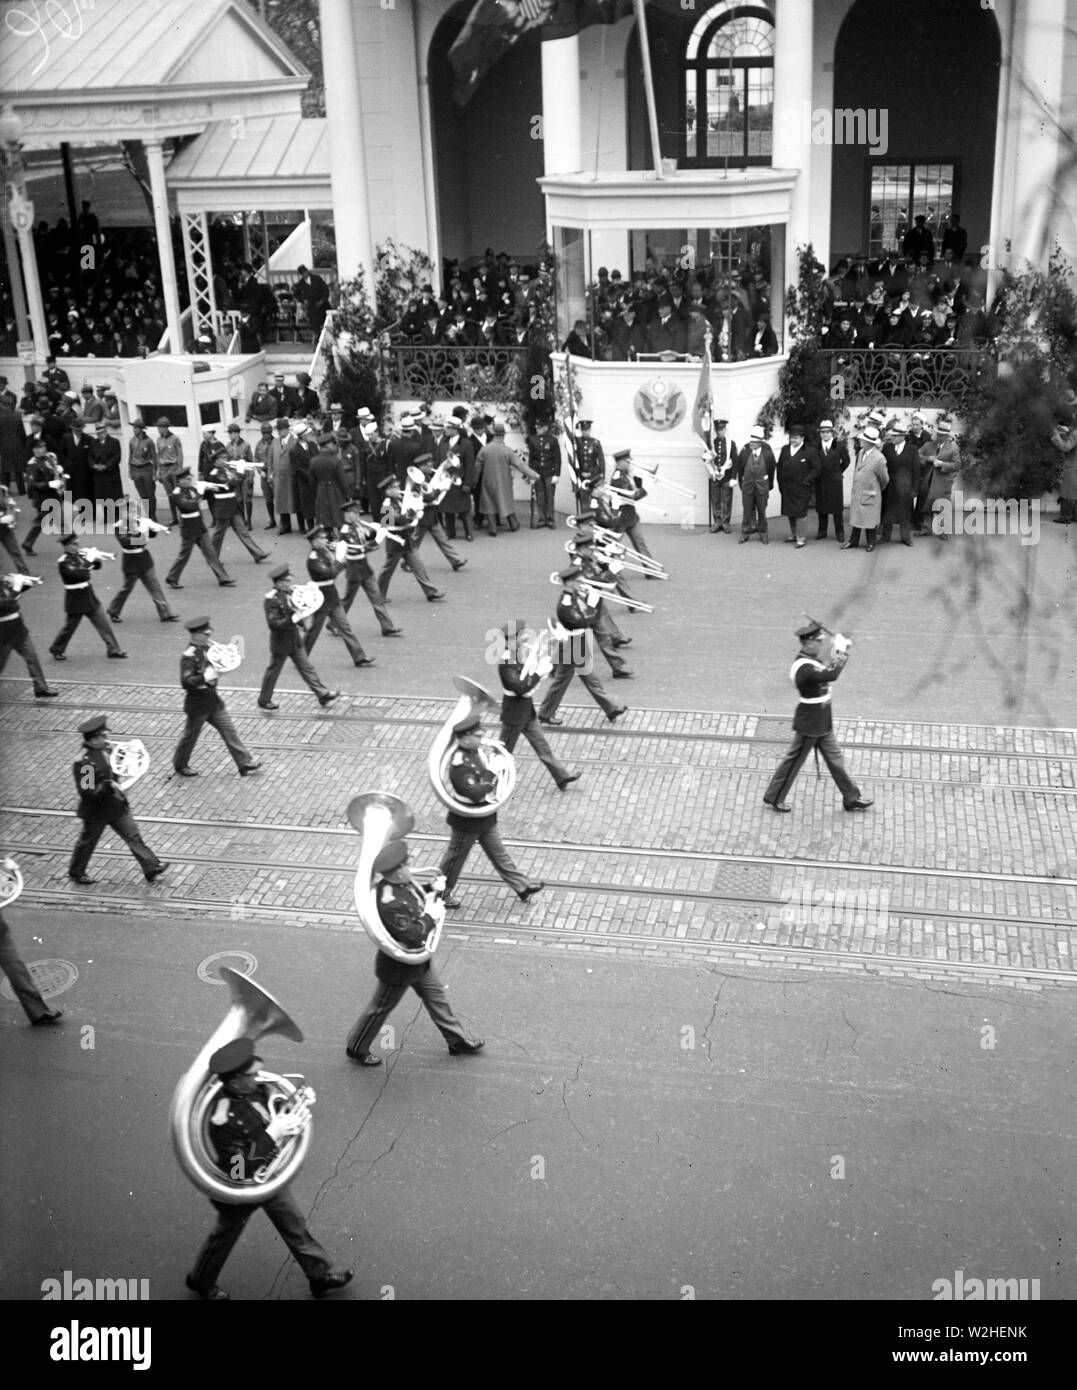 Franklin D. Roosevelt - Franklin D. Roosevelt inauguration. Parade and presidential viewing stand. Washington, D.C. Band passing review stand ca. March 4, 1933 Stock Photo